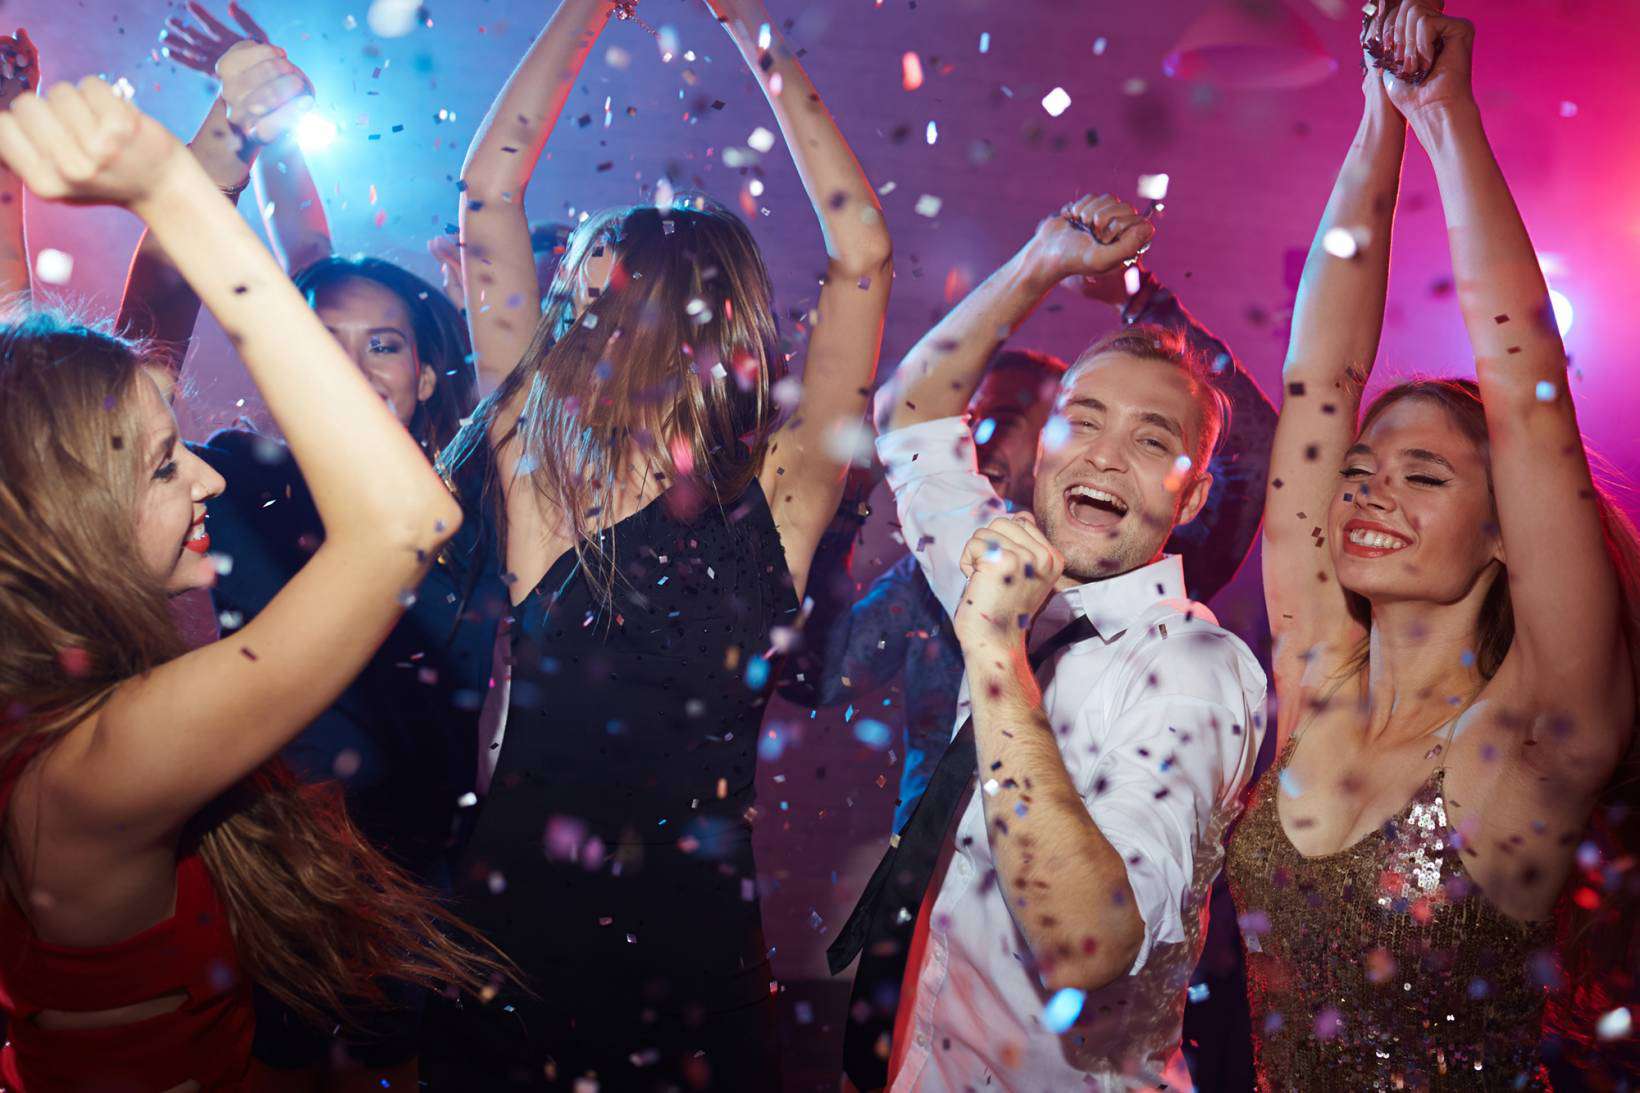 Rate These 15 Images and We Will Tell You What Your Future Looks Like partying